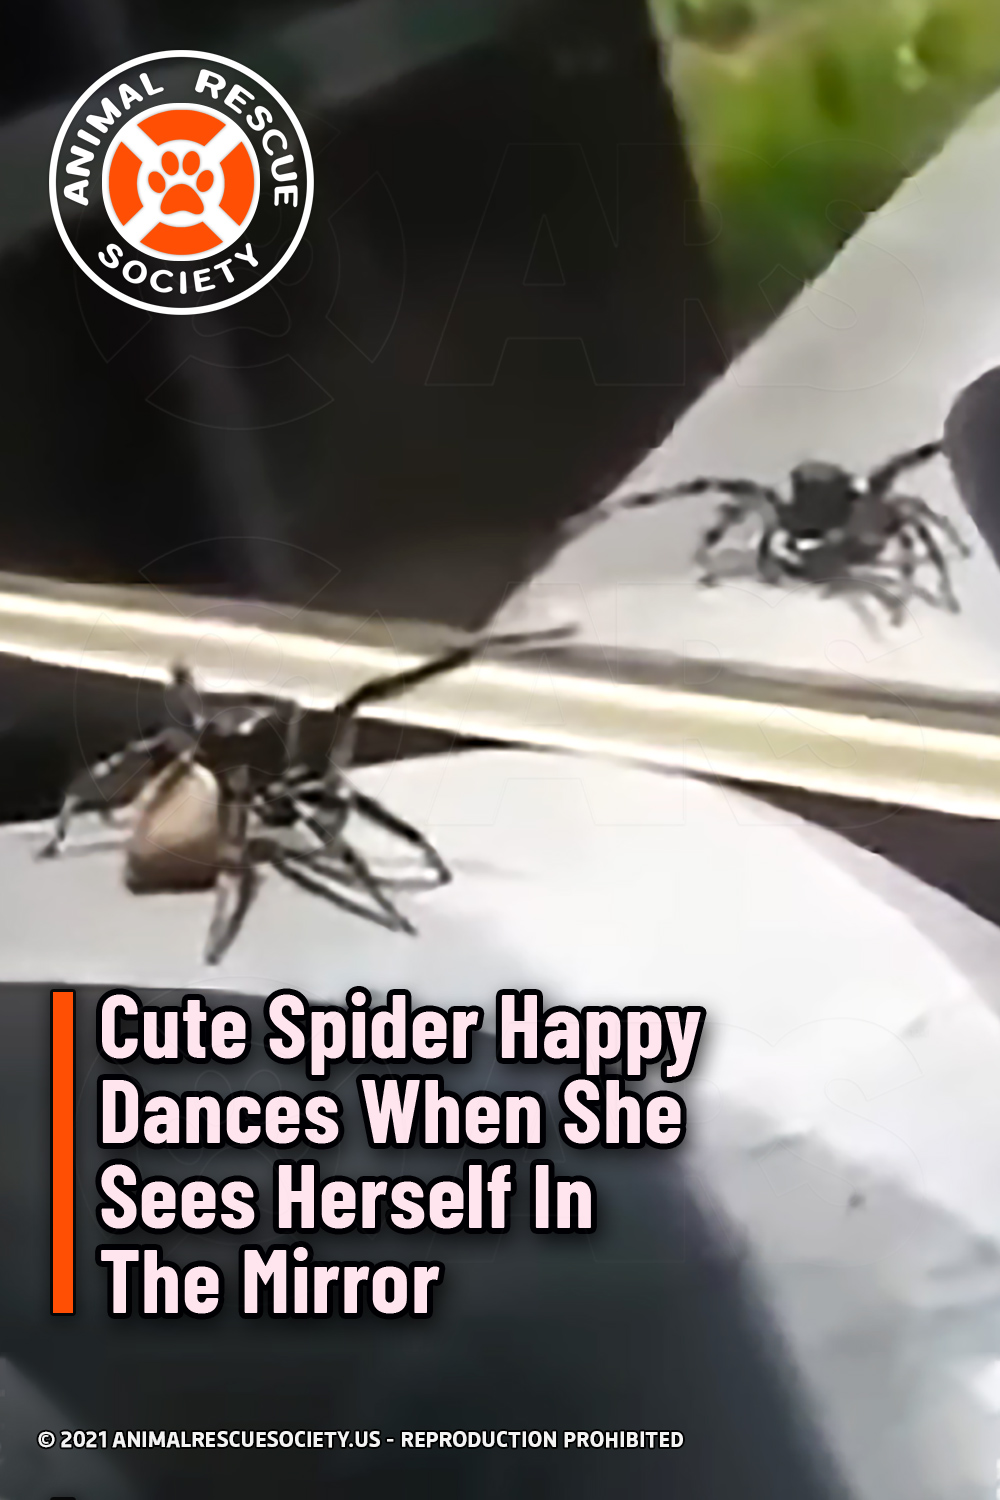 Cute Spider Happy Dances When She Sees Herself In The Mirror